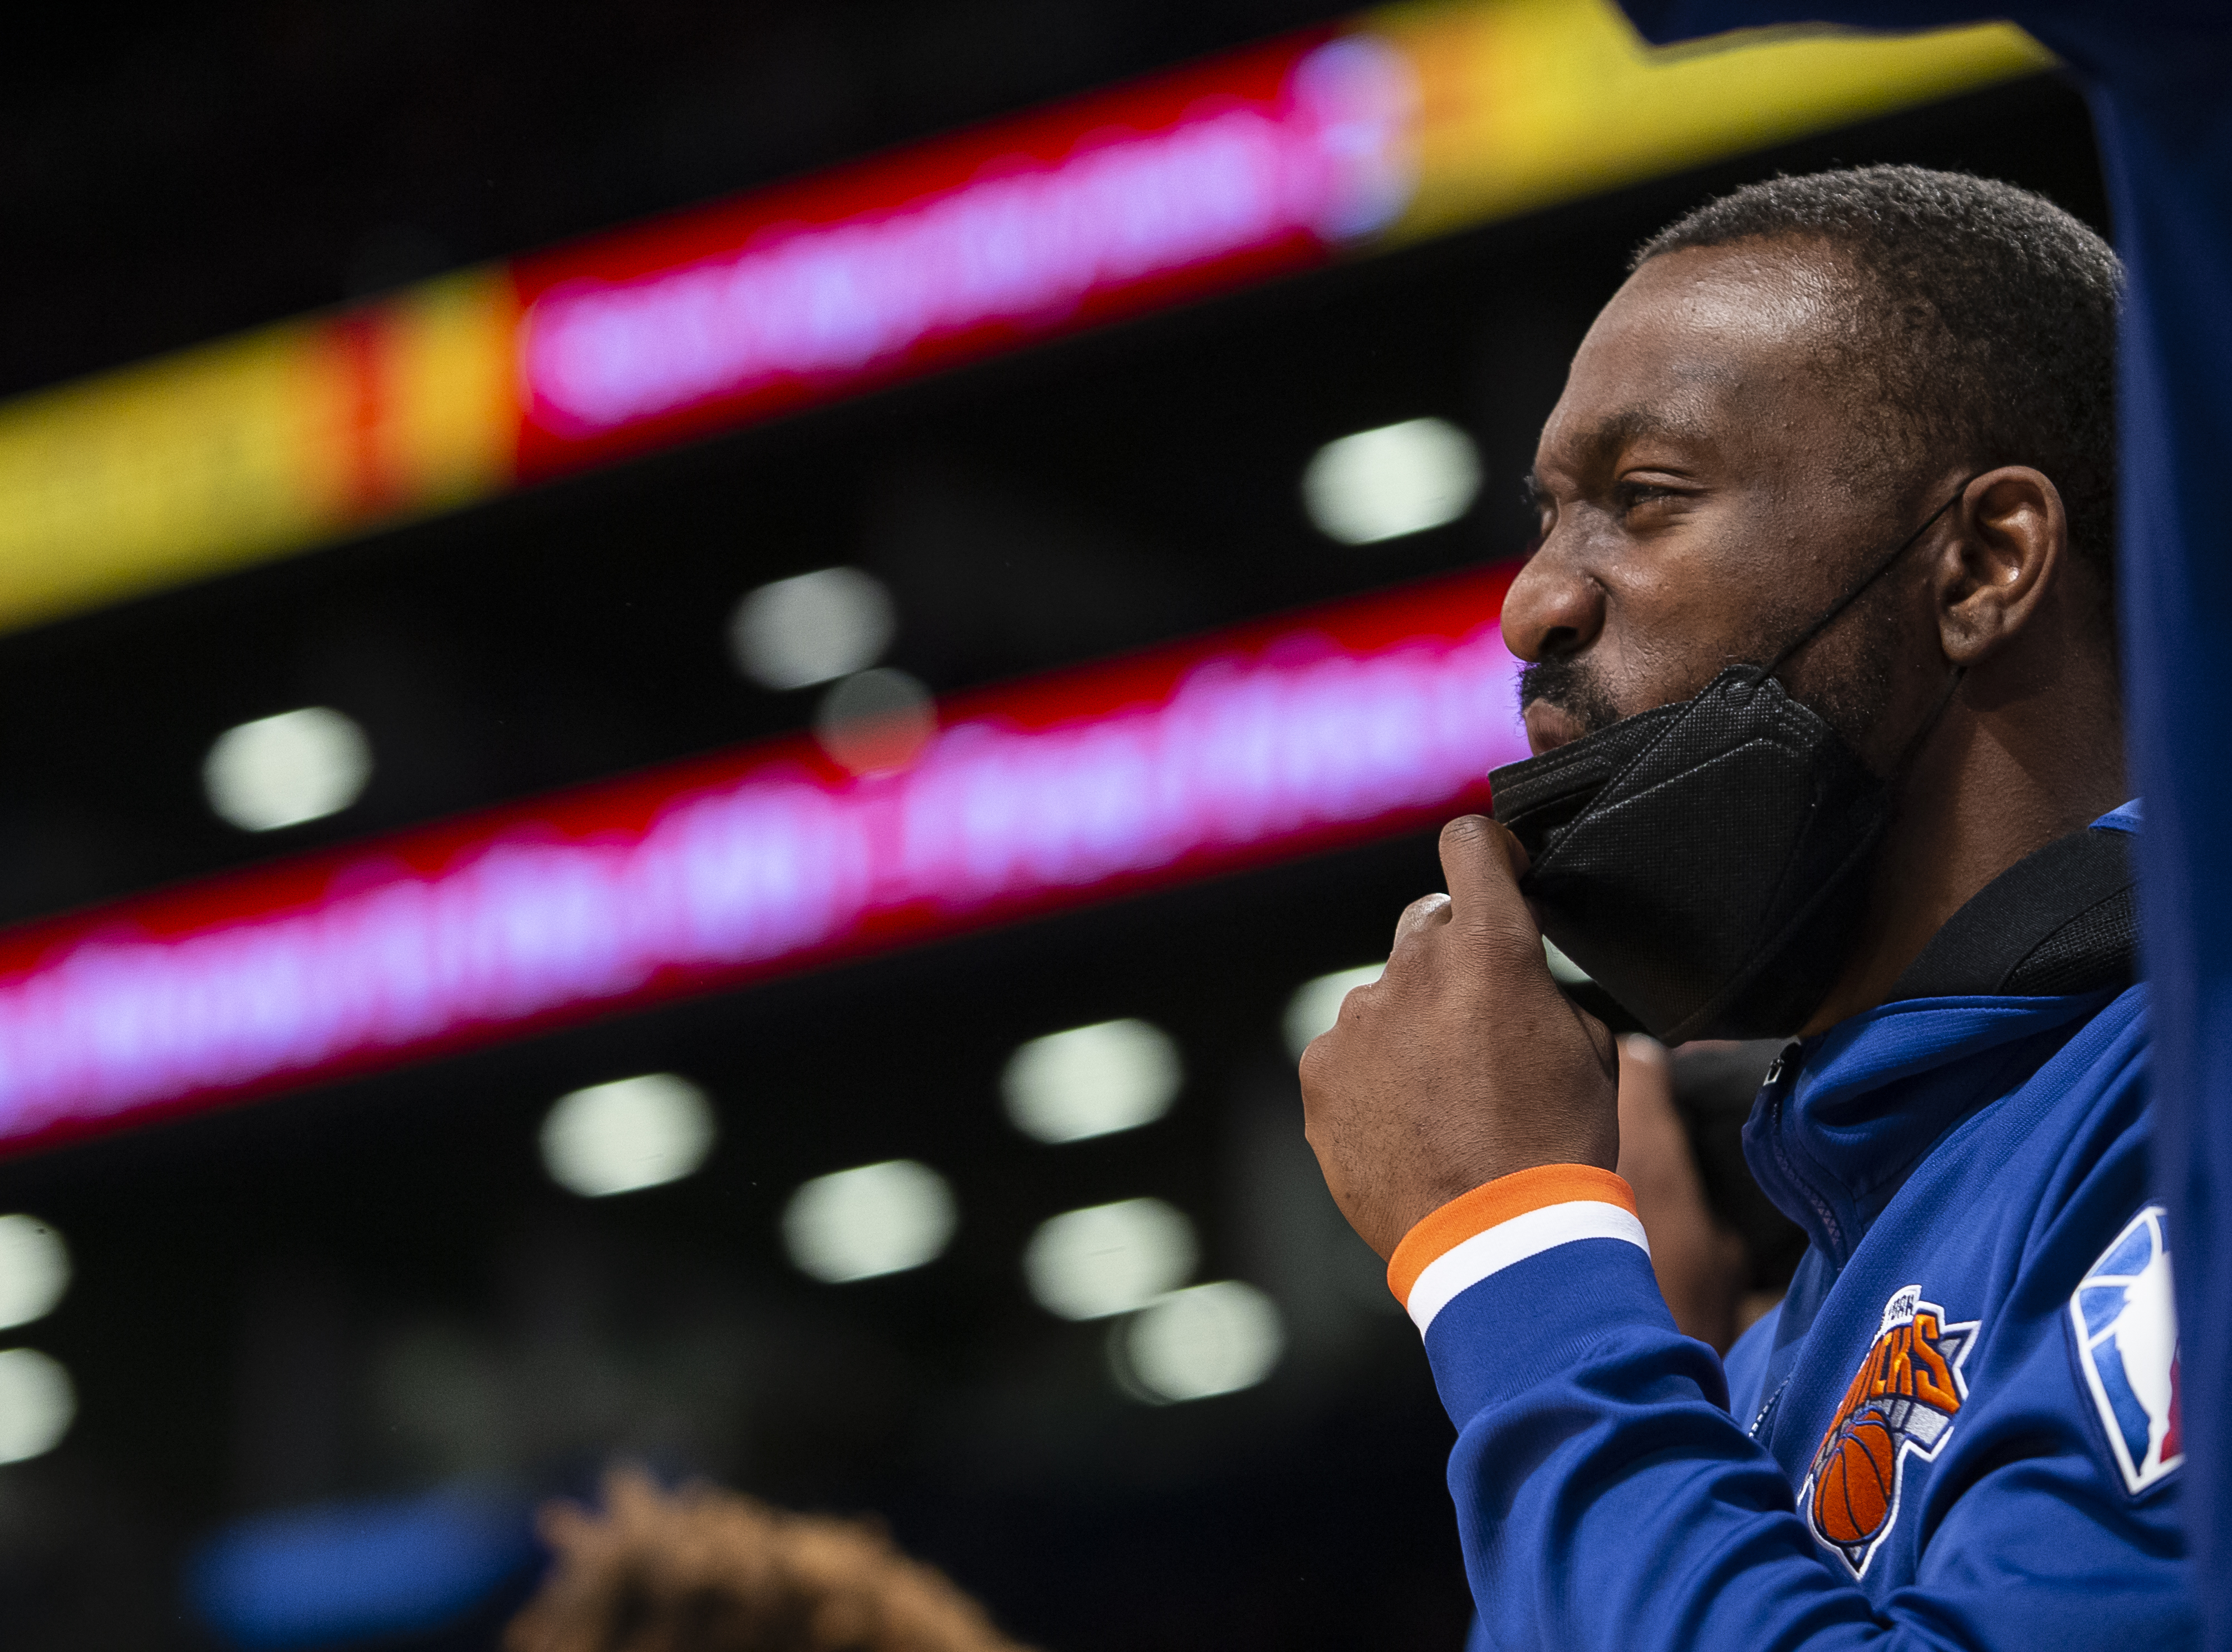 New York Knicks point guard Kemba Walker looks on during a game against the Brooklyn Nets